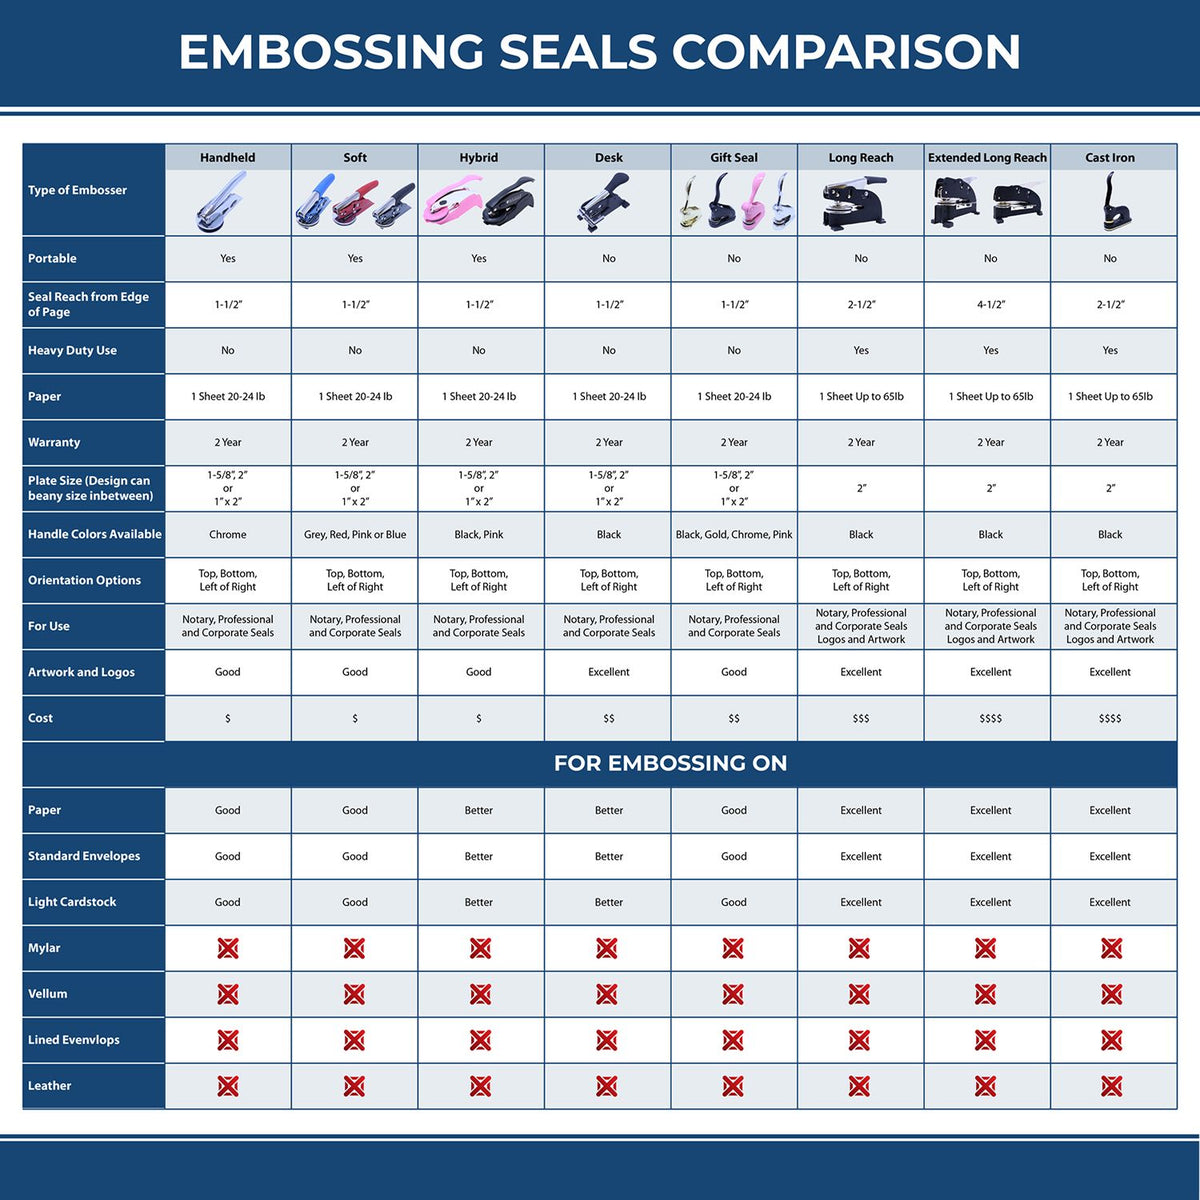 A comparison chart for the different types of mount models available for the Handheld Mississippi Land Surveyor Seal.